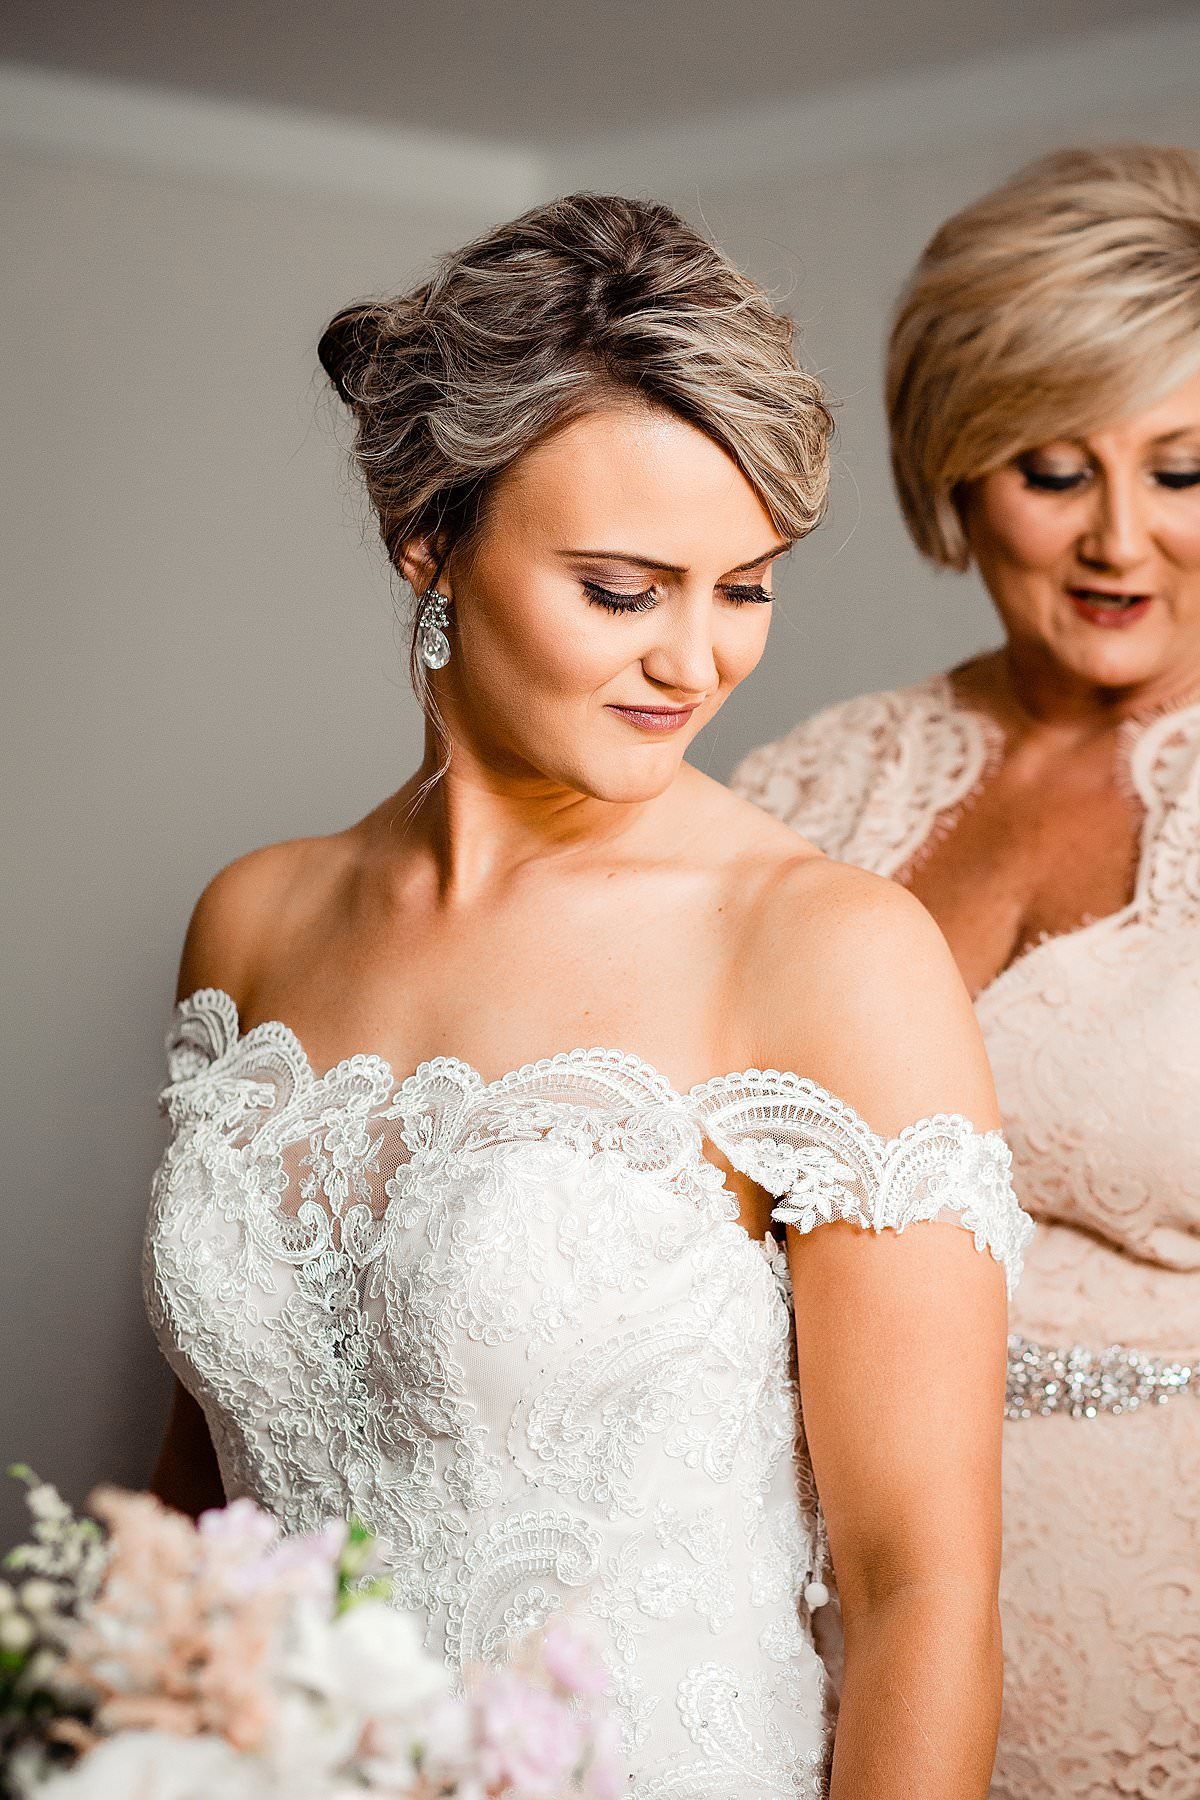 Bride wearing a lace dress with her hair up and mom helping zip her into her dress